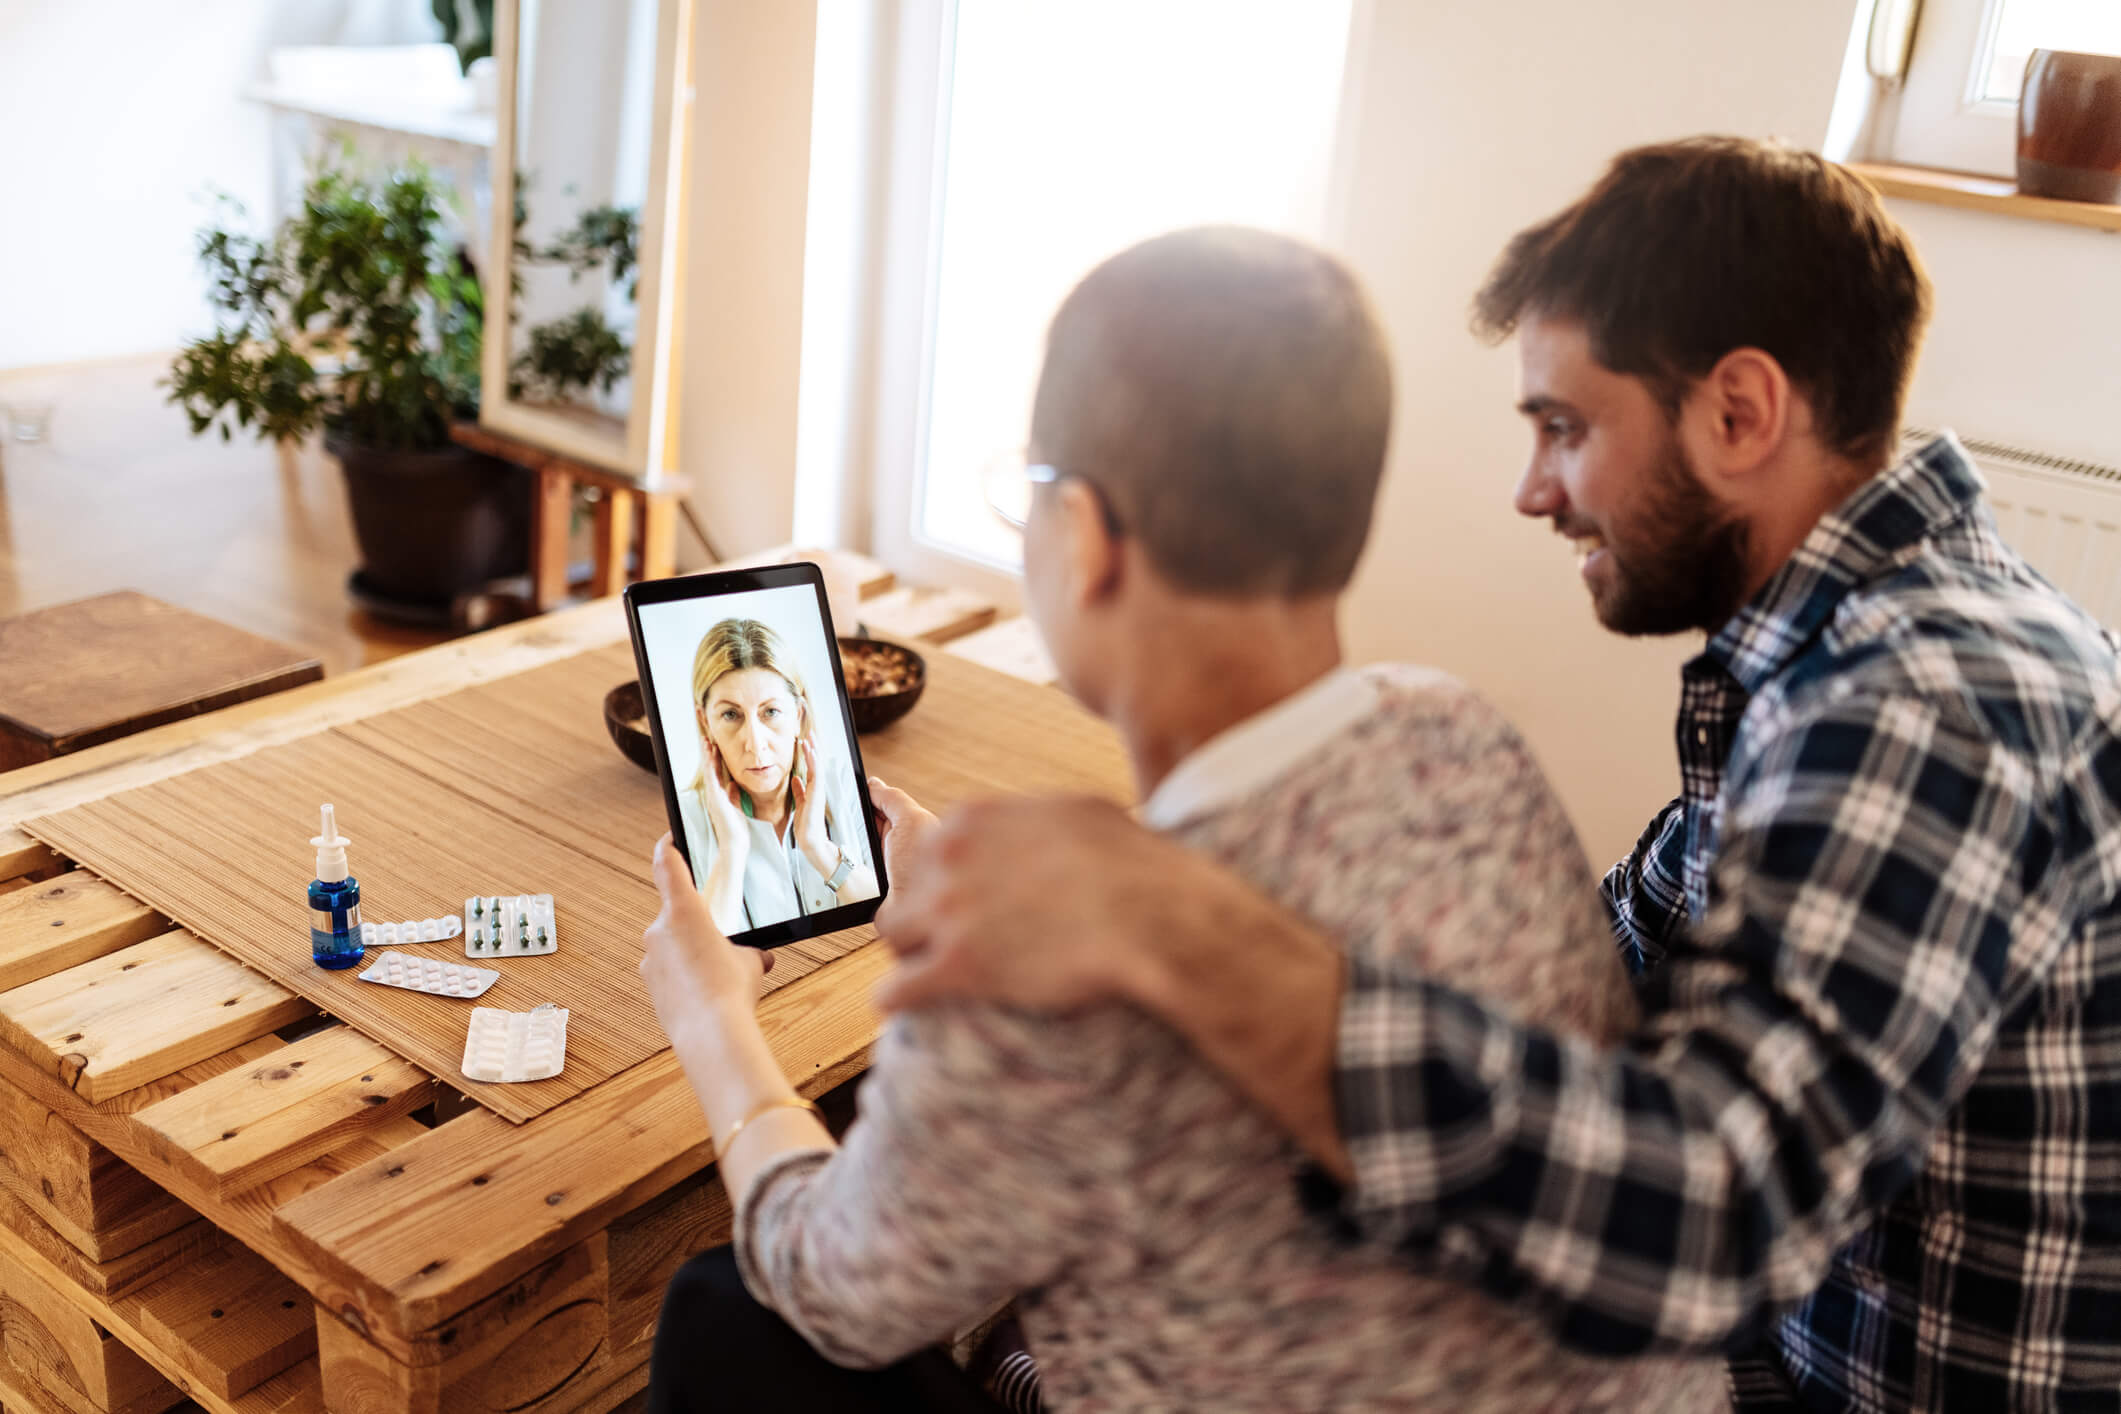 cancer-patient-and-male-friend-talking-to-woman-on-tablet